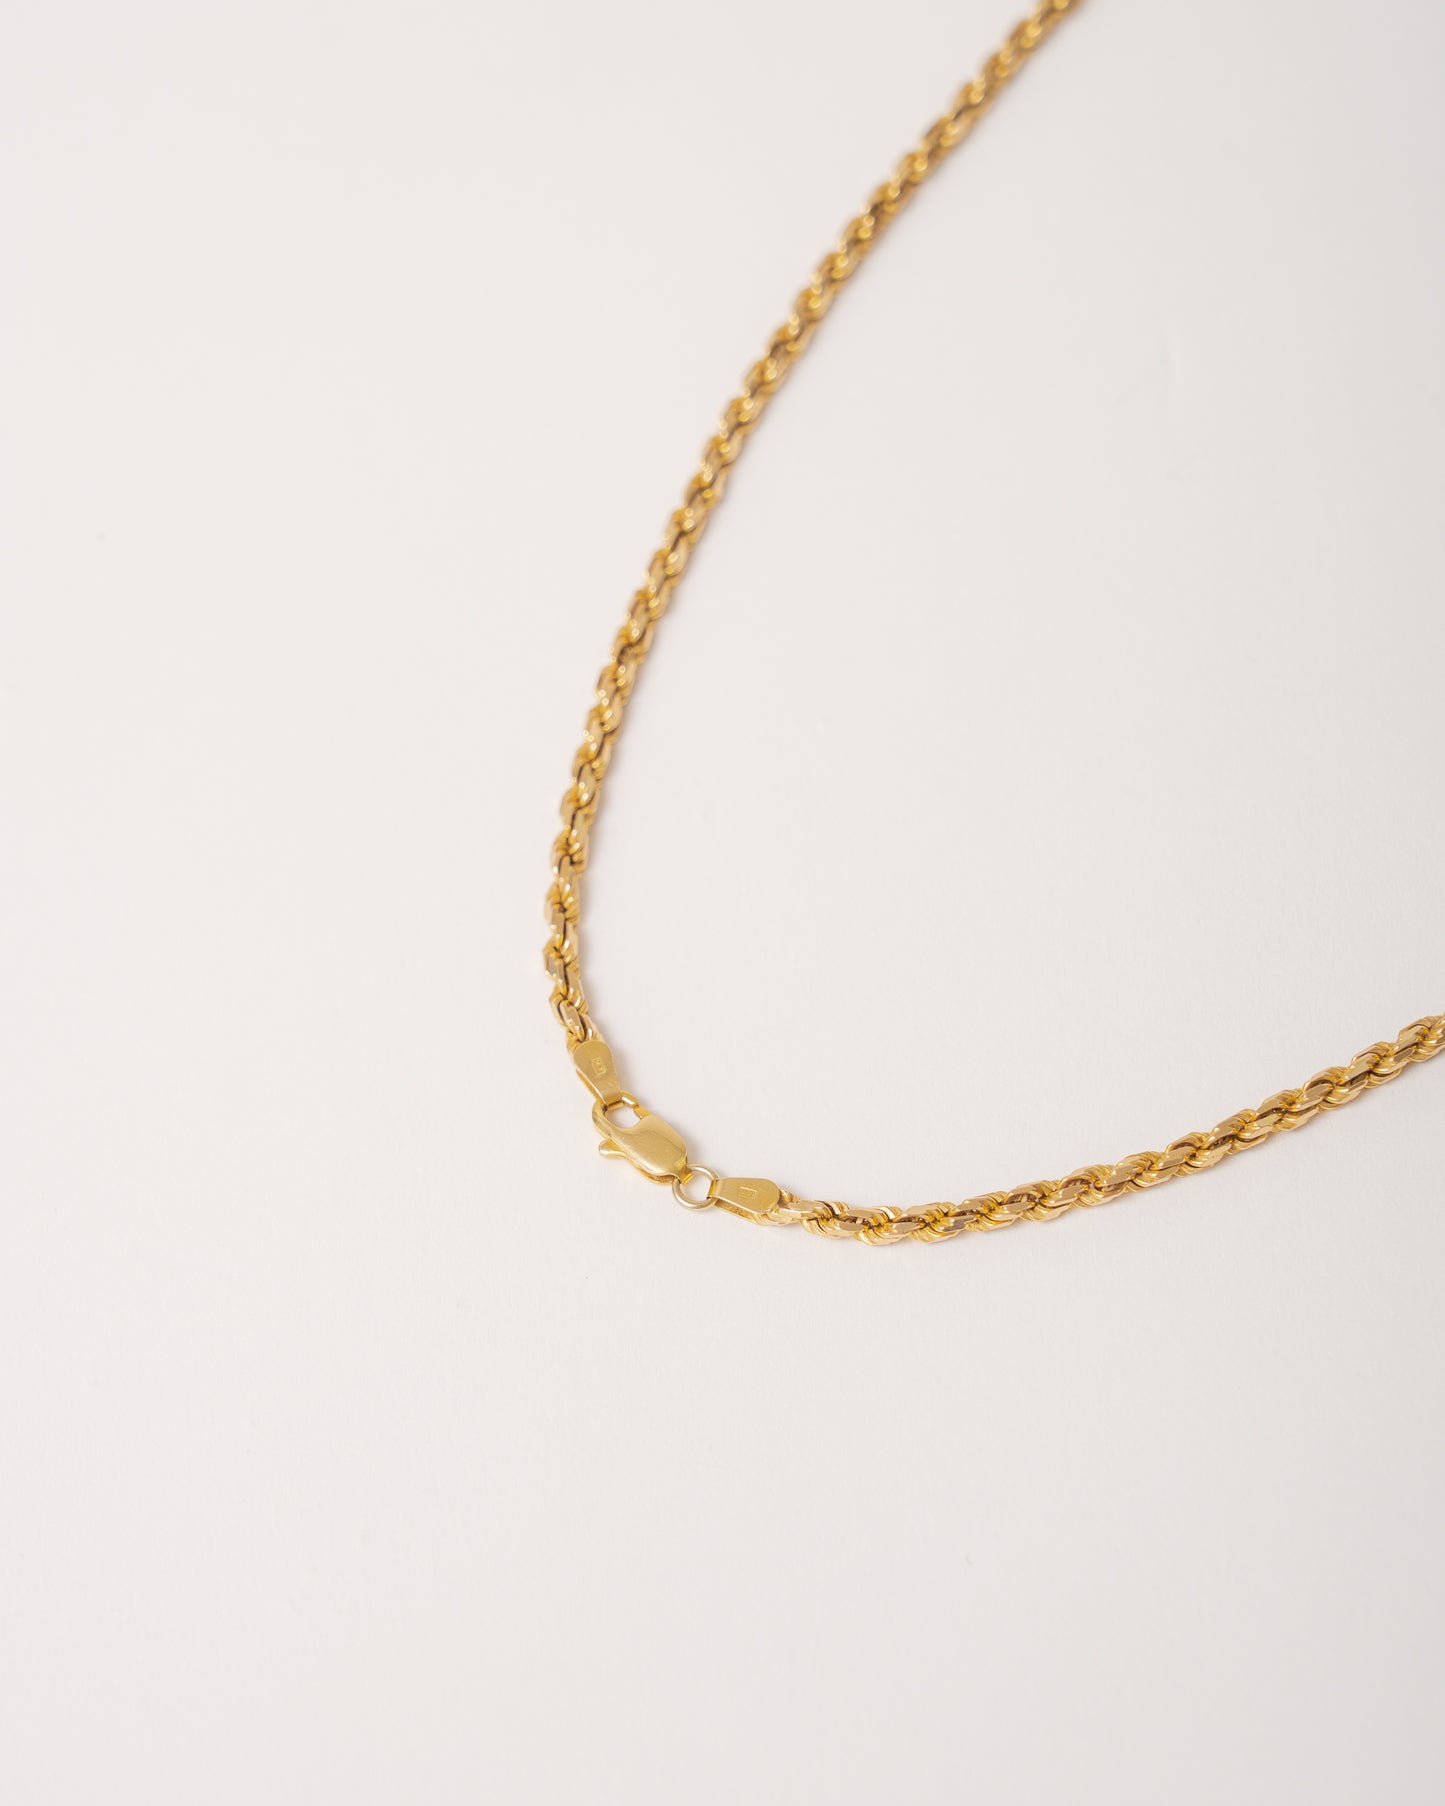 20" Rope Necklace - 14K Gold